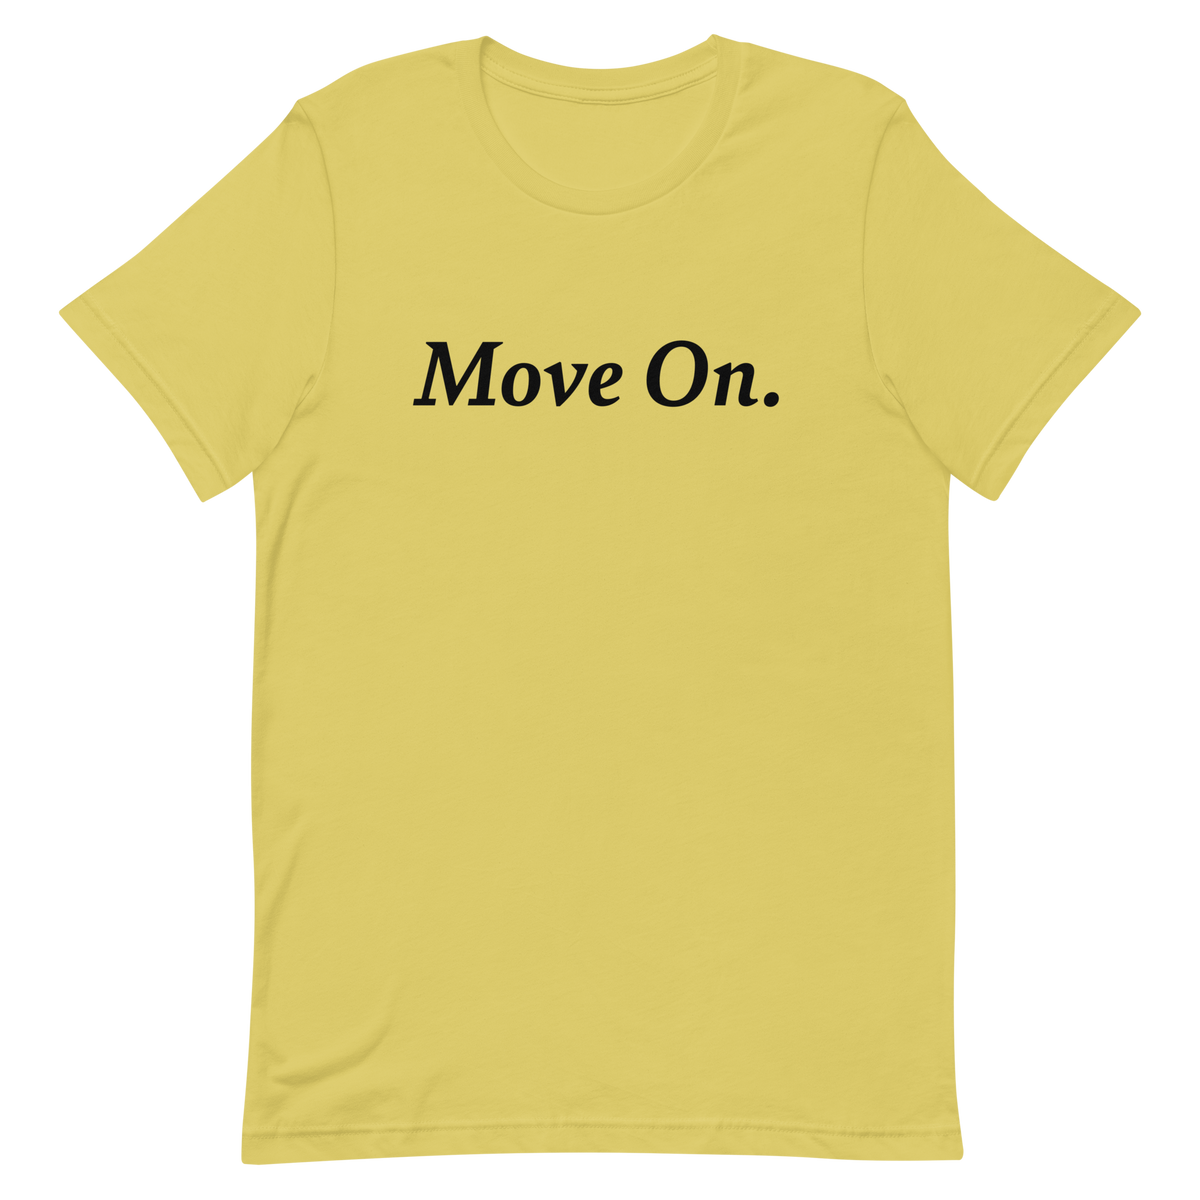 Move On. T-Shirt